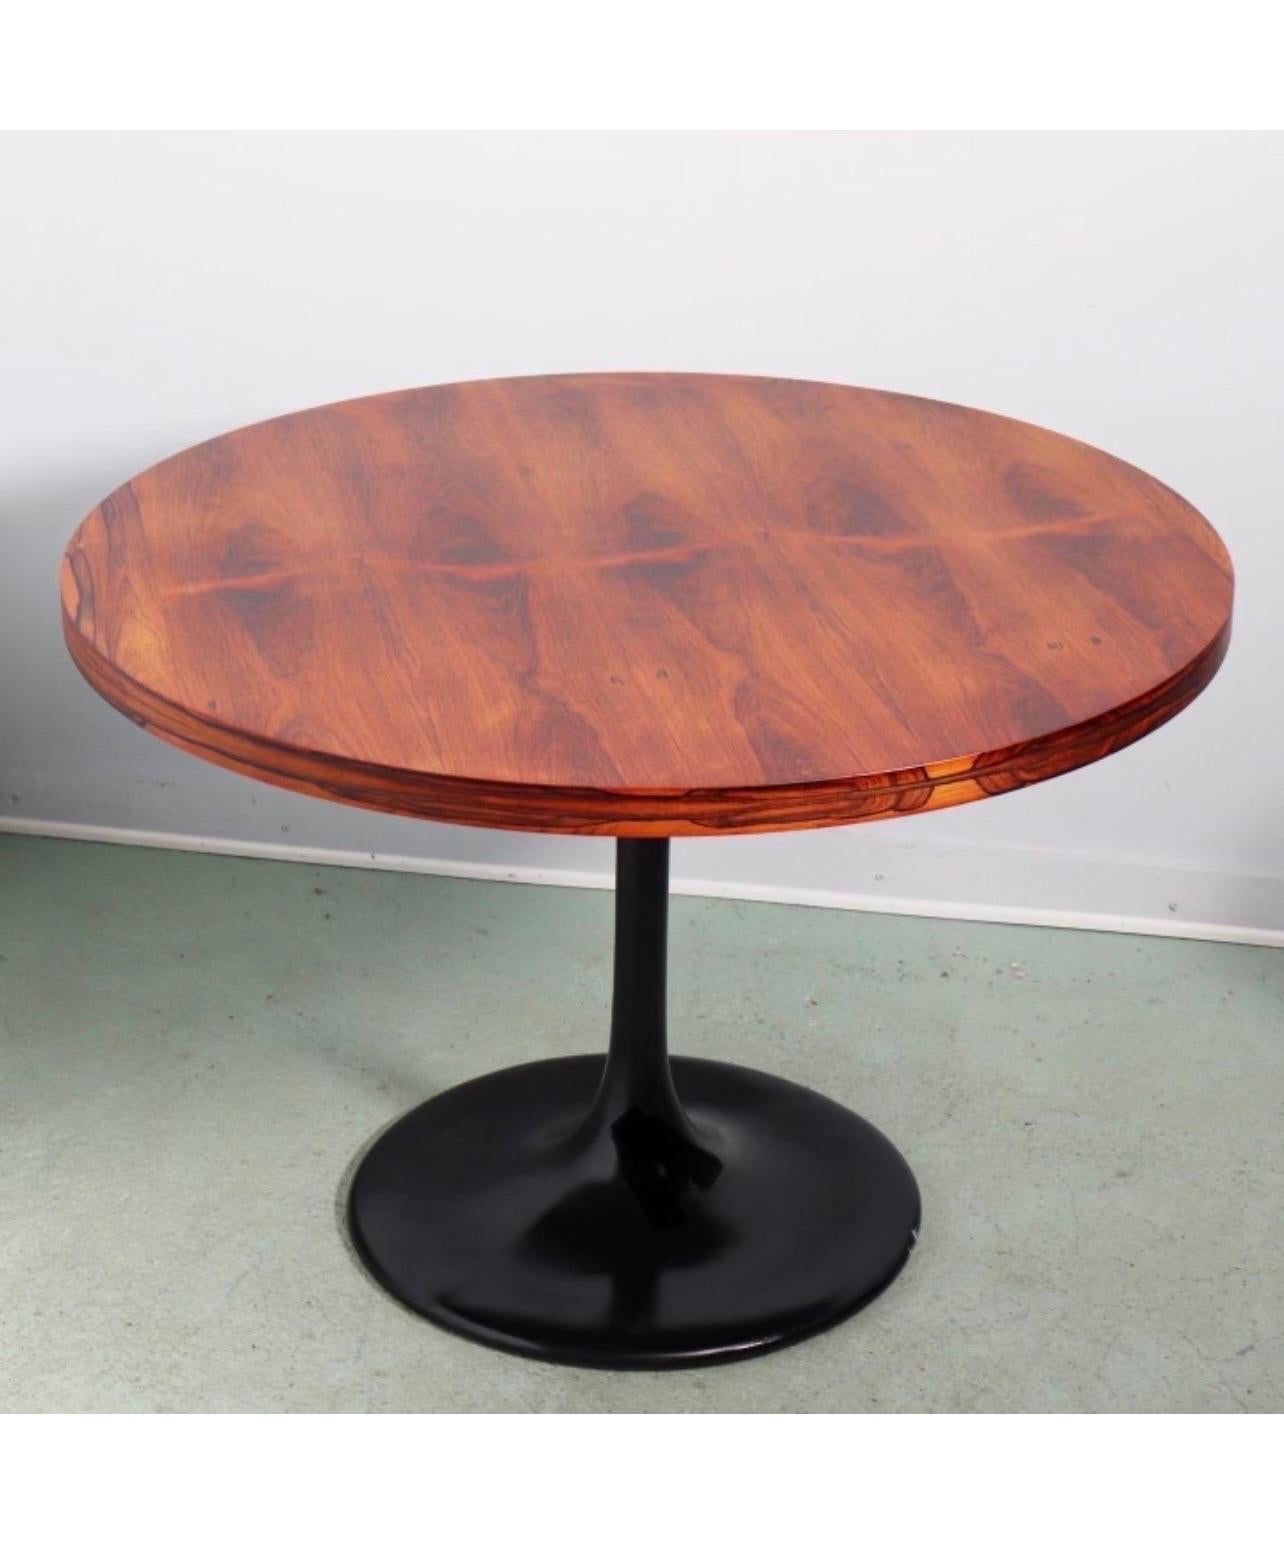 Late 20th Century Rosewood Circular Dining or Foyer Table by Milo Baughman with Black Tulip Base